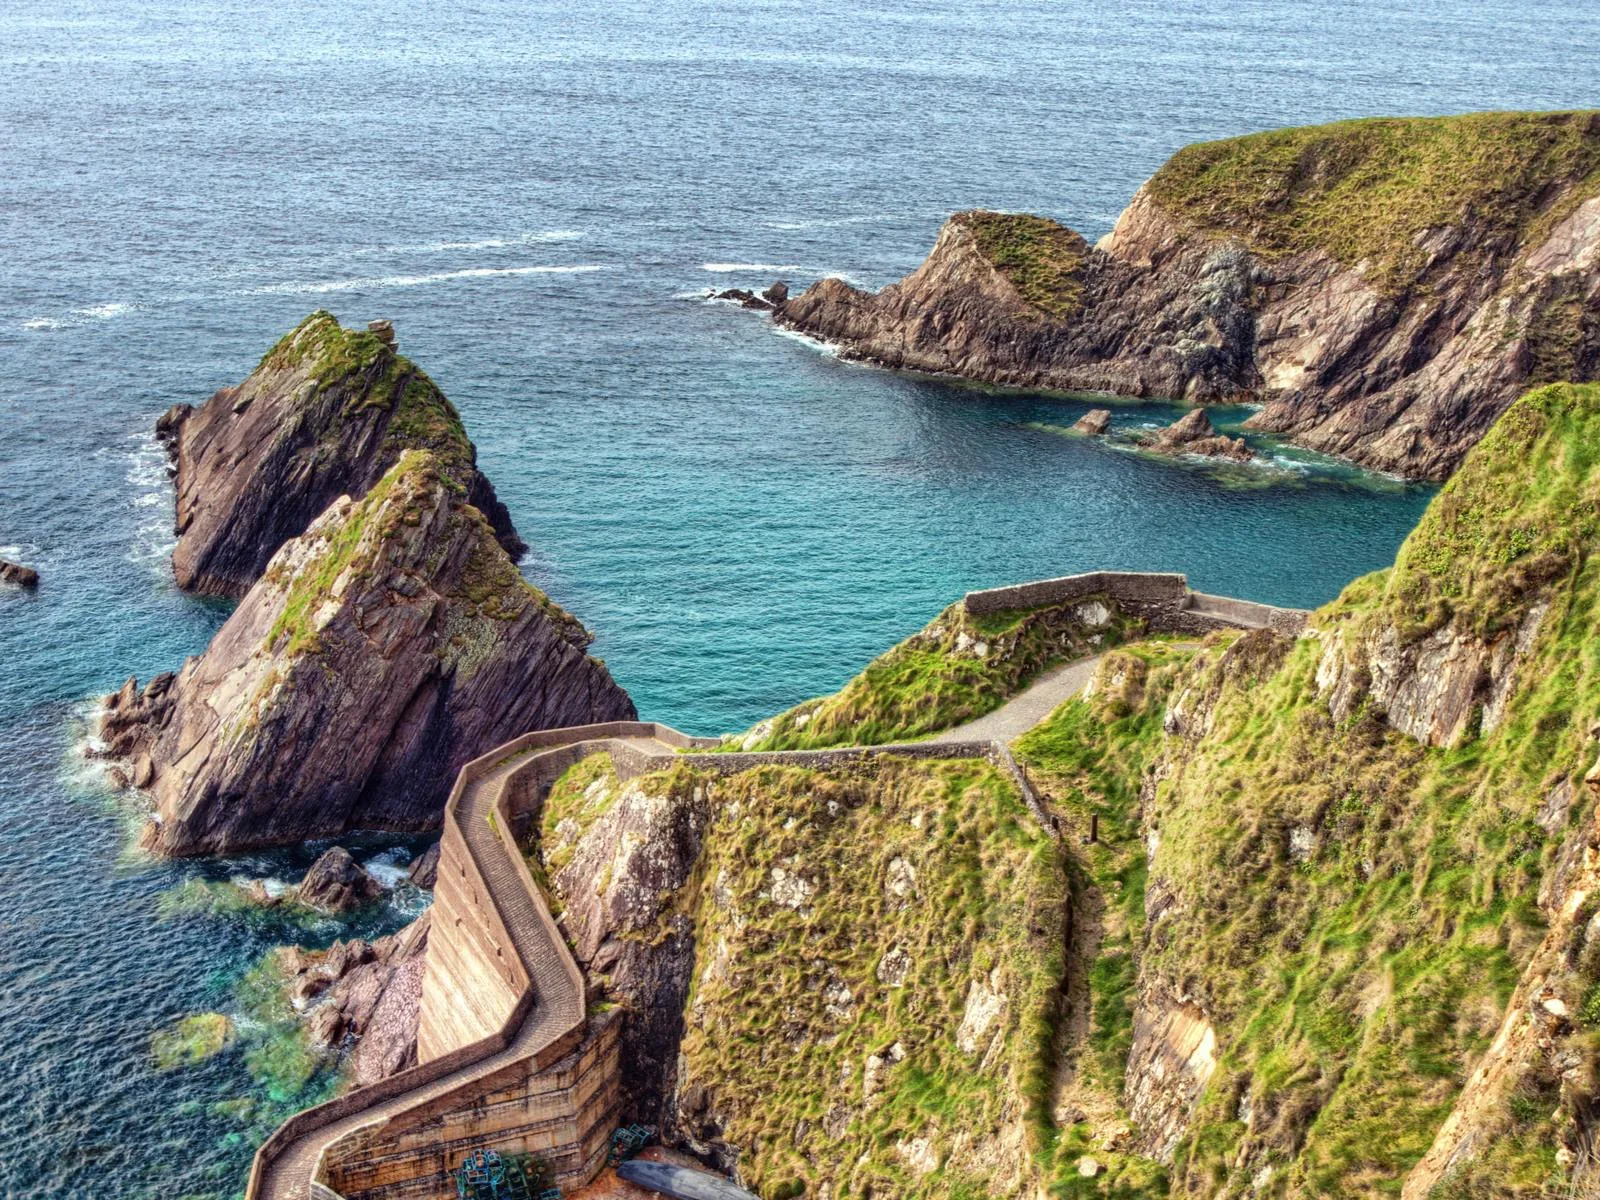 Winding pathway at Dunquin Pier and unique rock formations over a calm sea at Dingle Peninsula, a piece on the best places to visit in Ireland